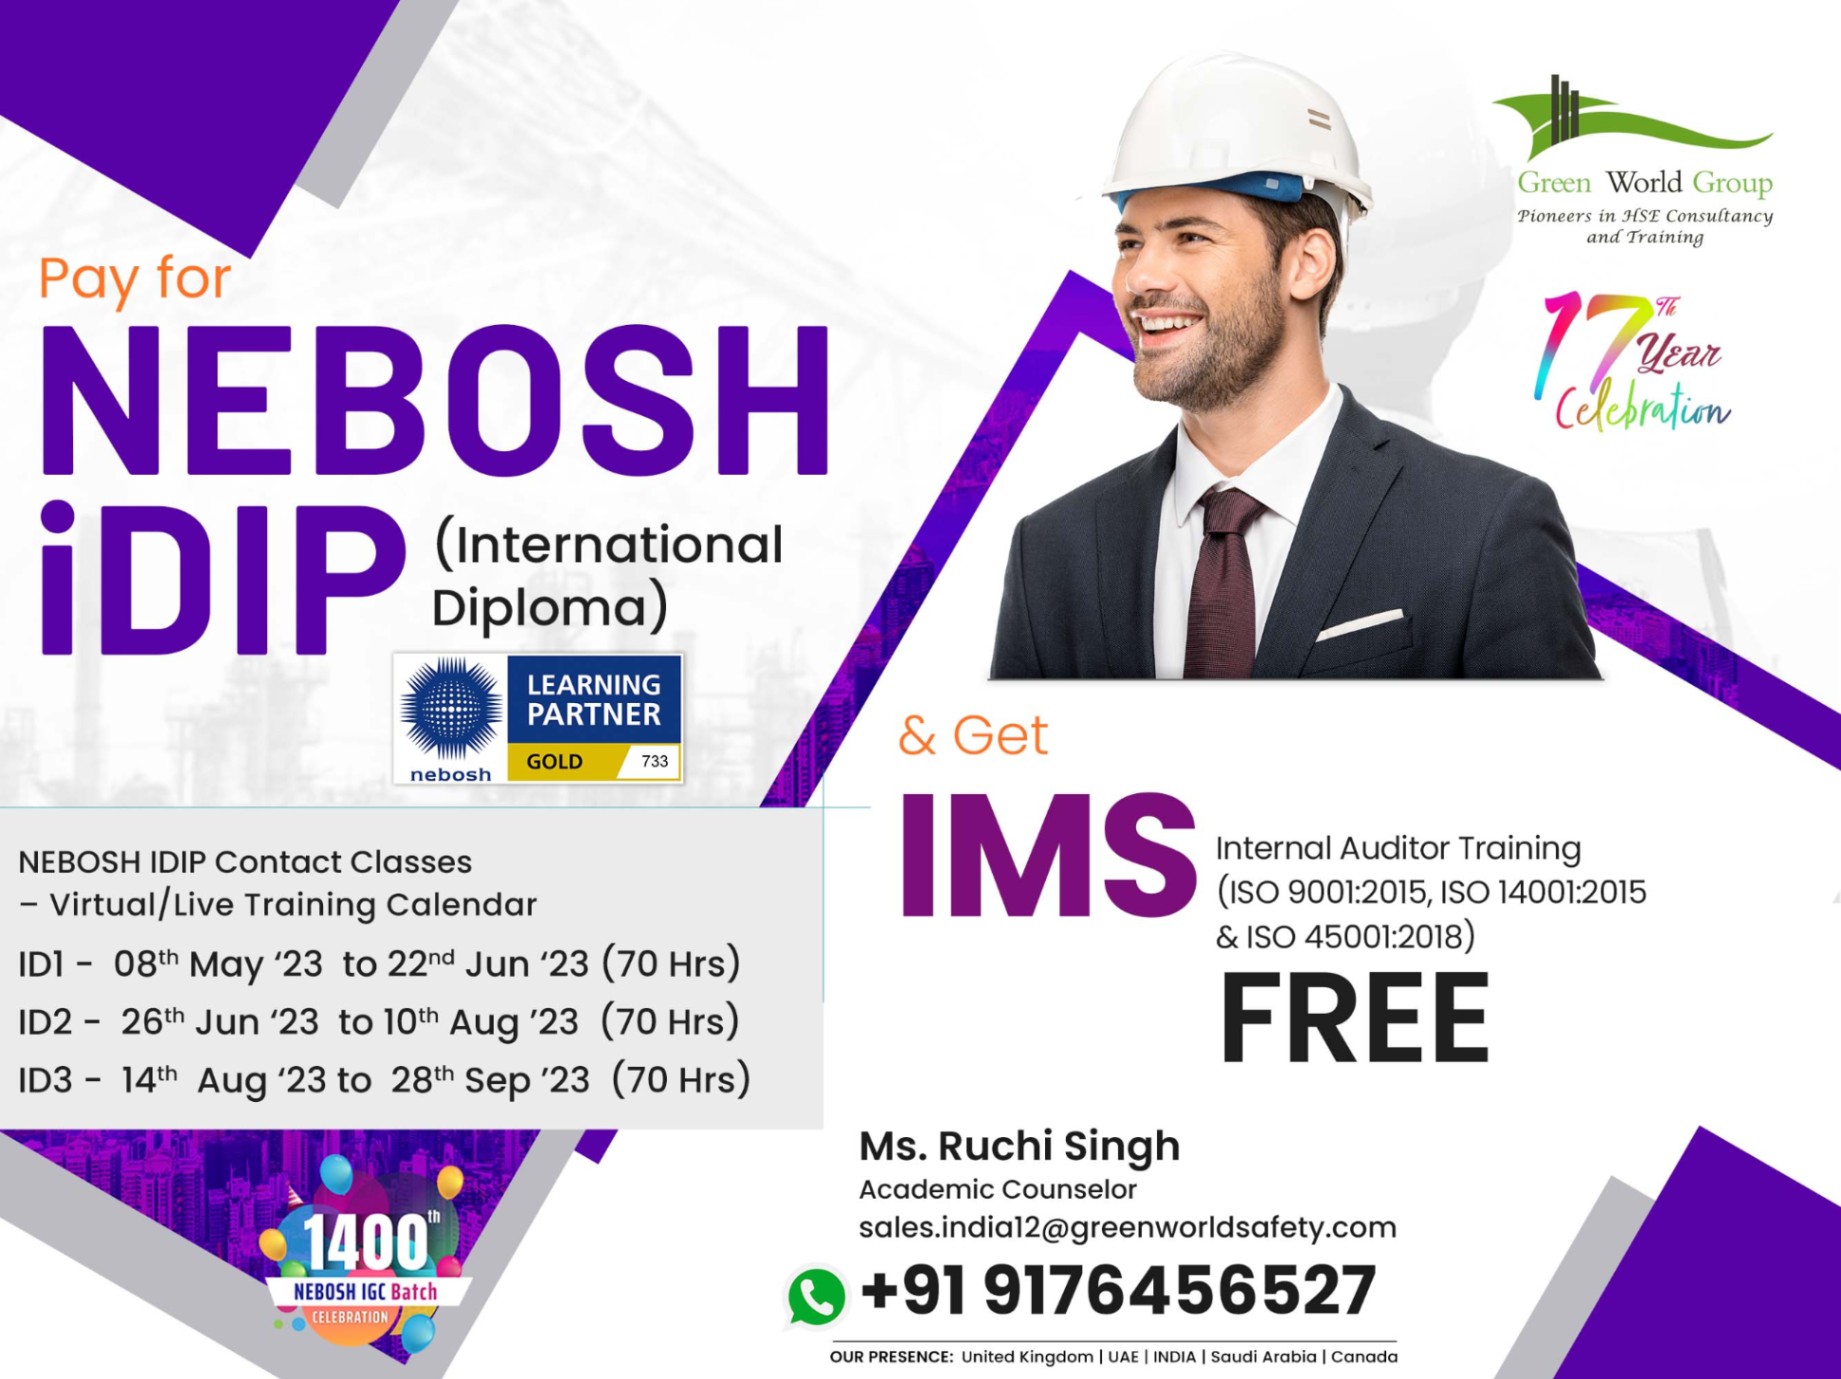 Join NEBOSH iDIP Course & Accelerate Your Career with Green World Group